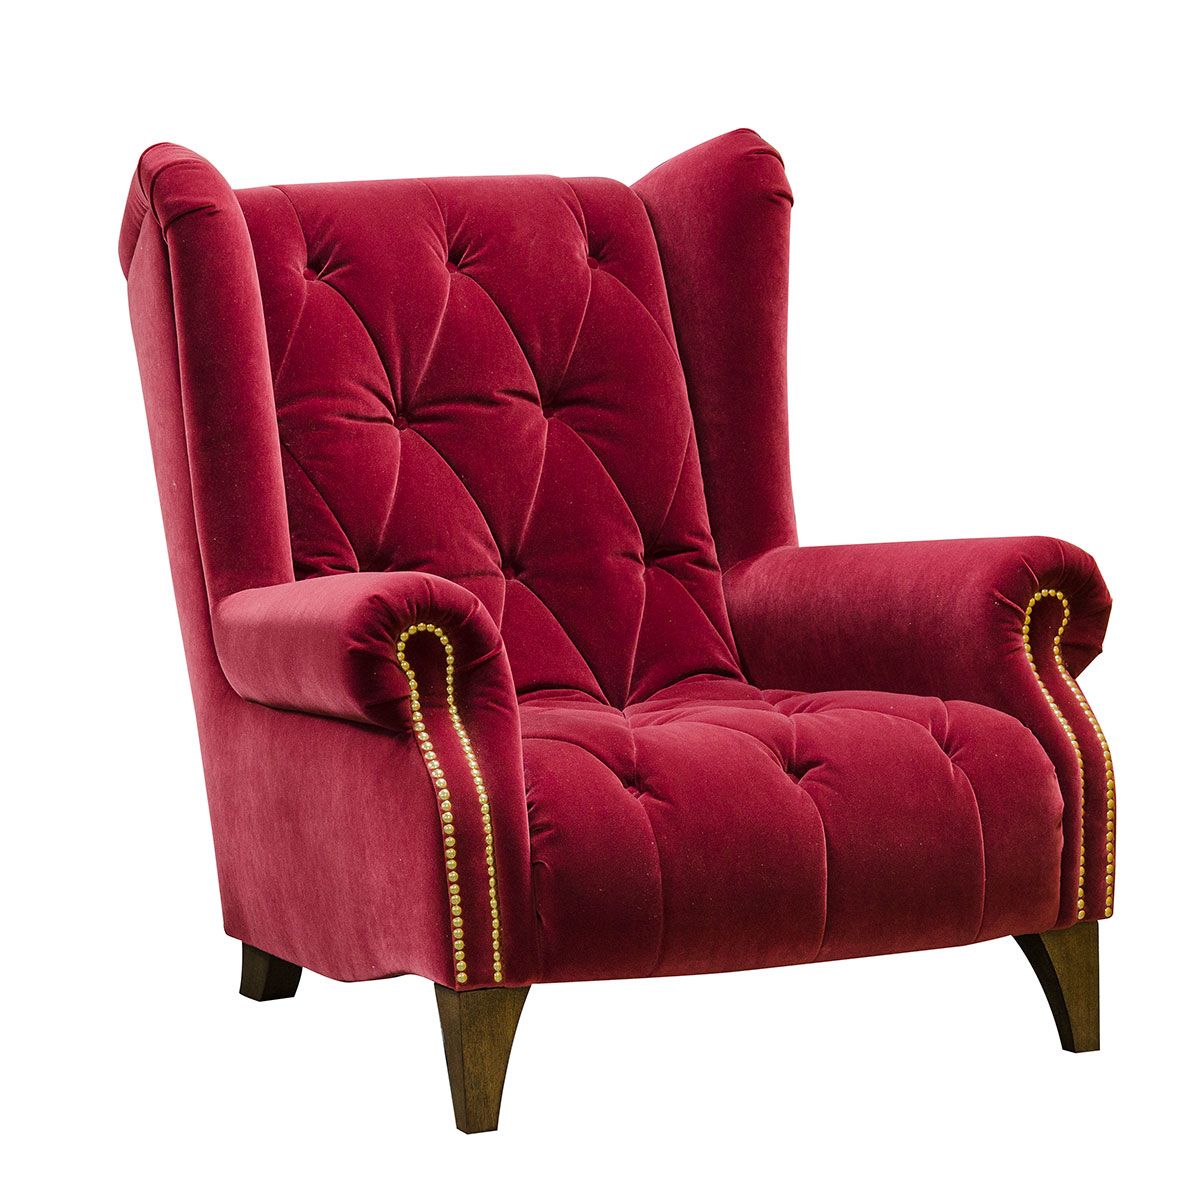 Alexander & James Ossie Armchair – Biba Berry For Well Liked James Armchairs (View 8 of 20)